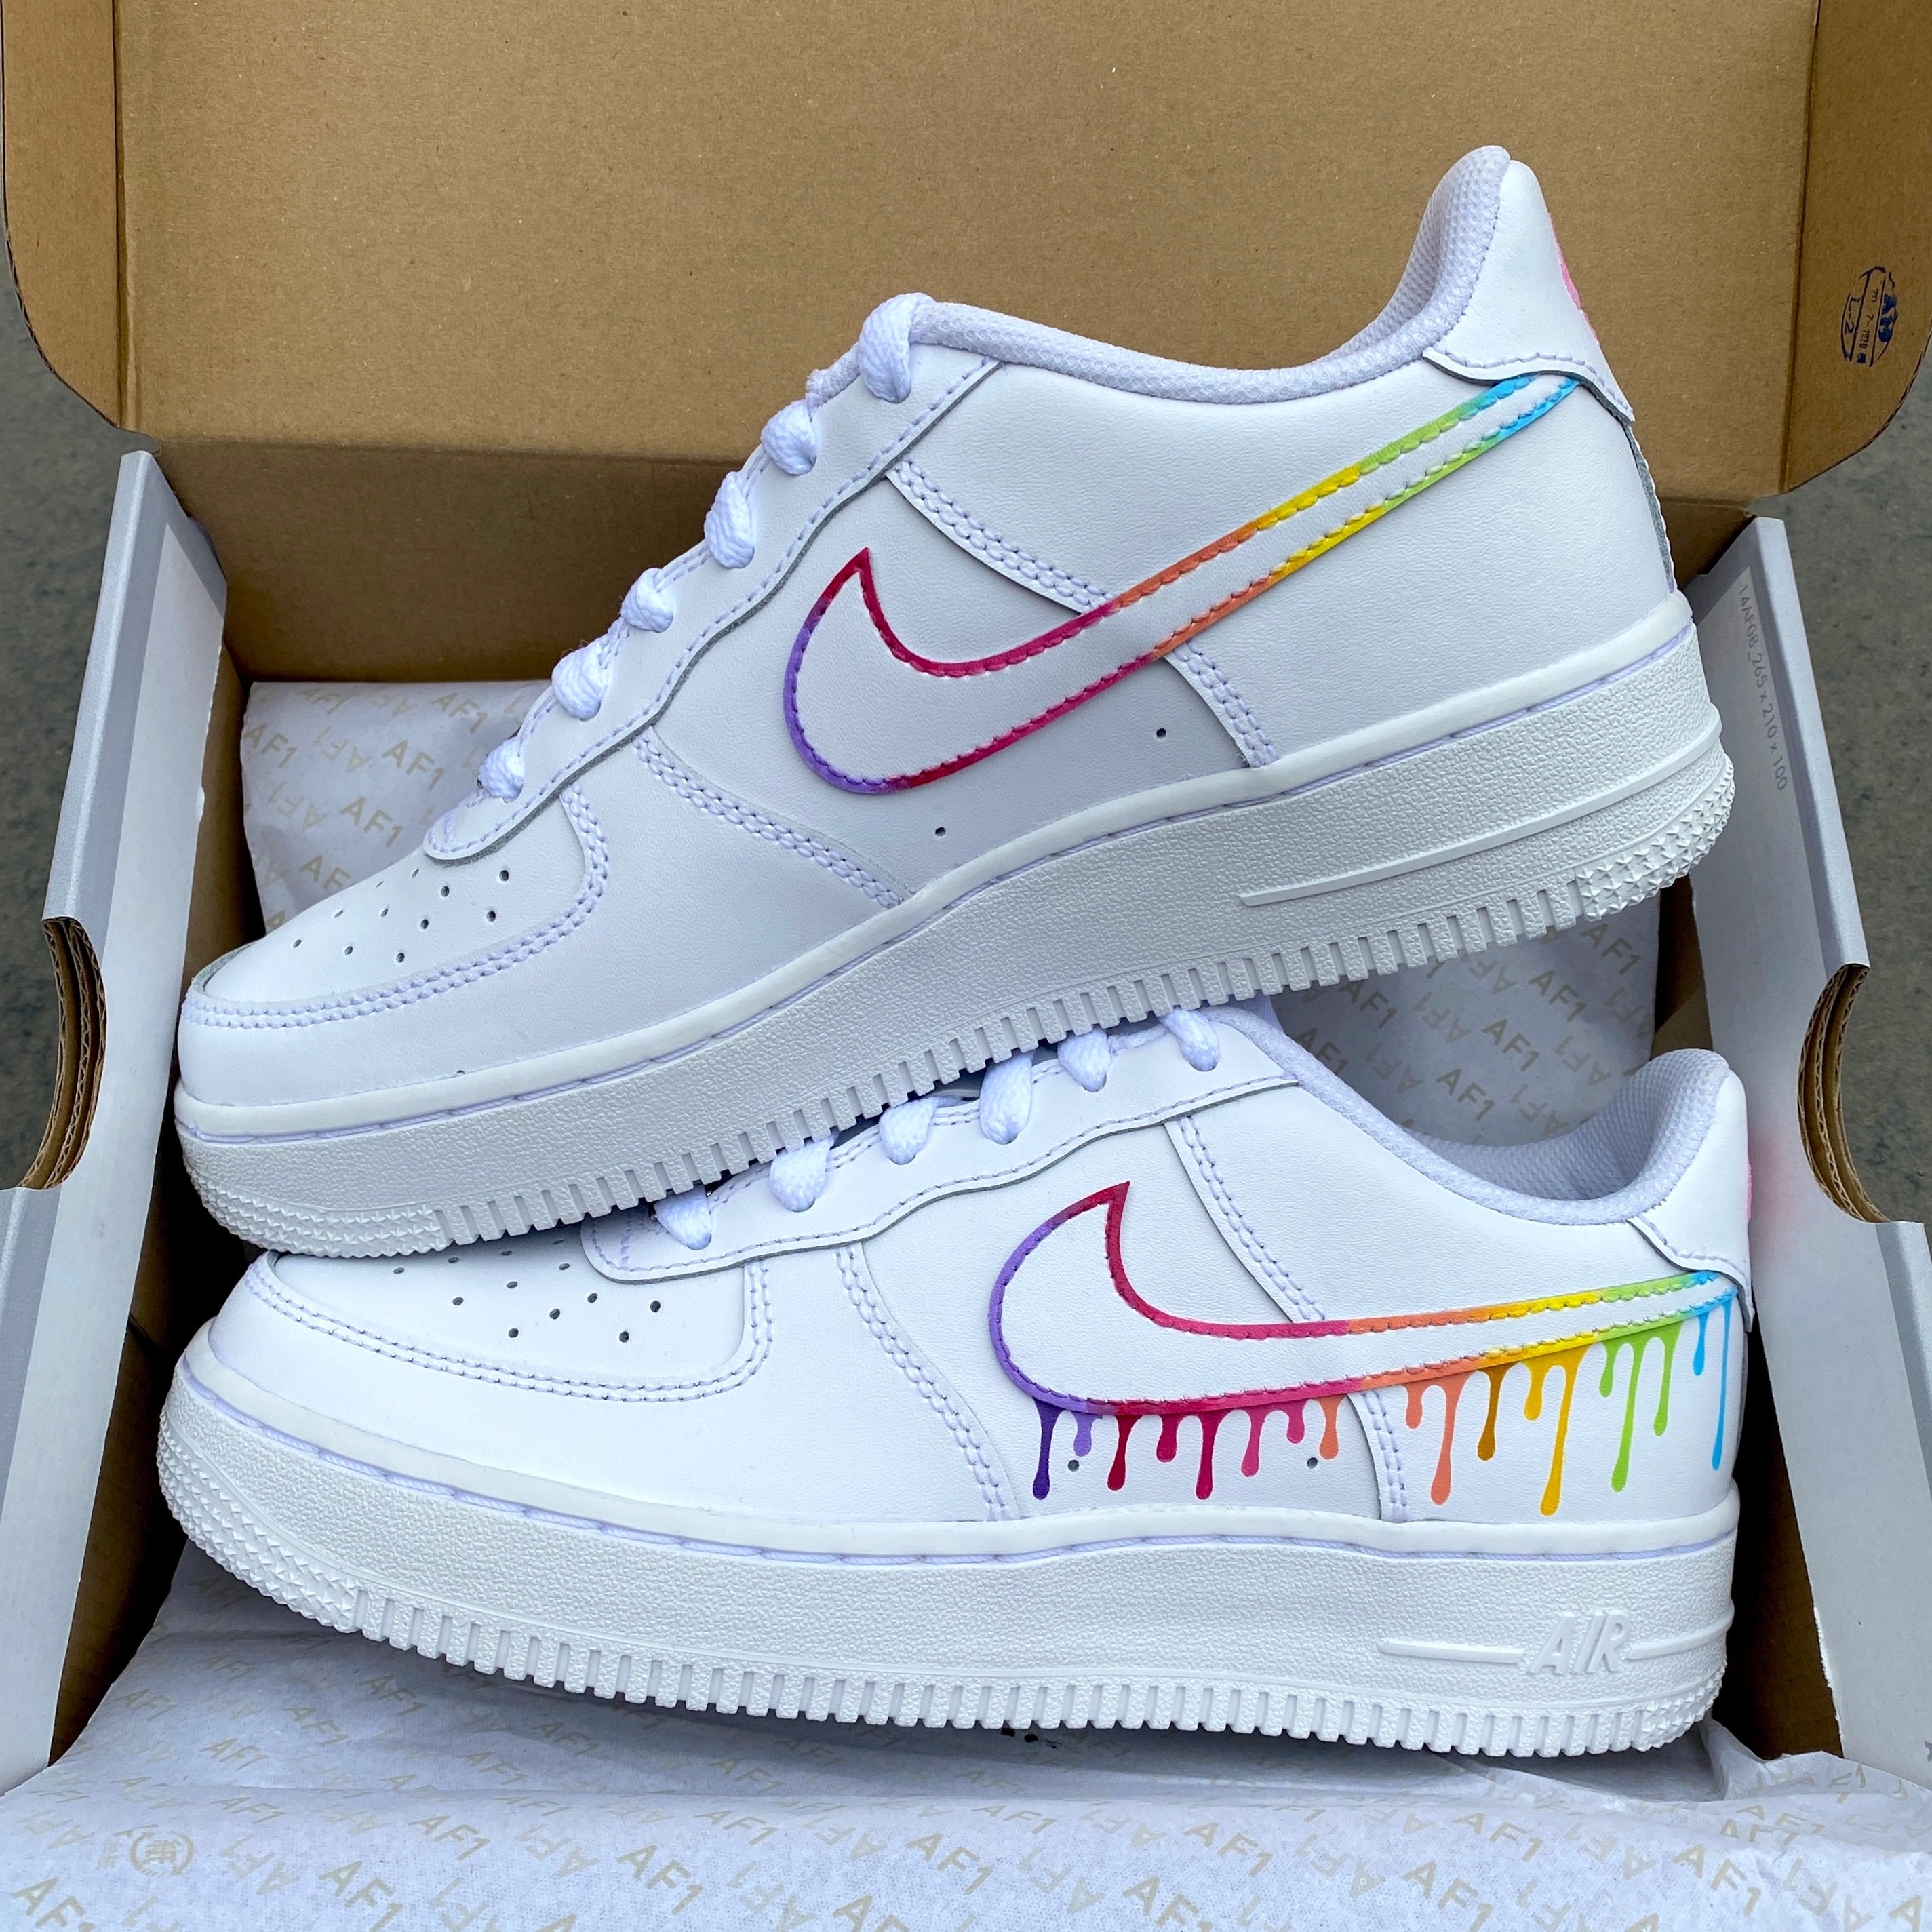 Nike Air Force 1 Color Drip Hand Drawn Paint Marker Custom Sneakers  Colorful Customized Shoes Nike Rainbow Custom 